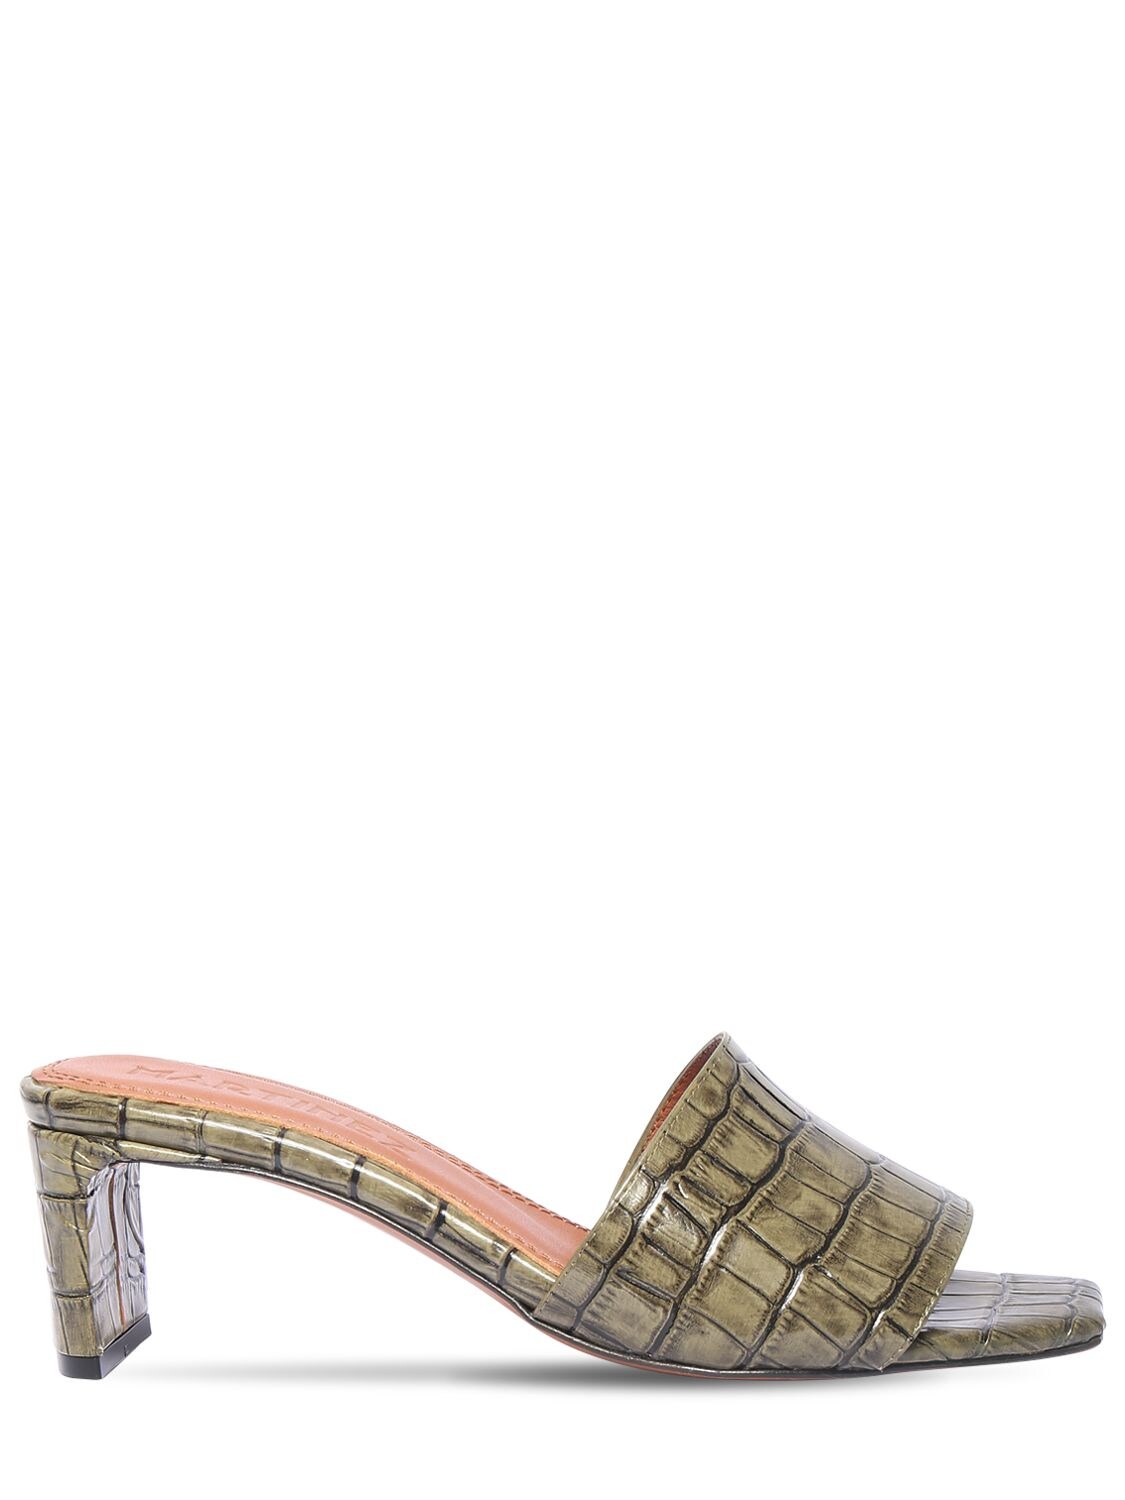 Souliers Martinez 50mm Croc Embossed Leather Sandals In Khaki